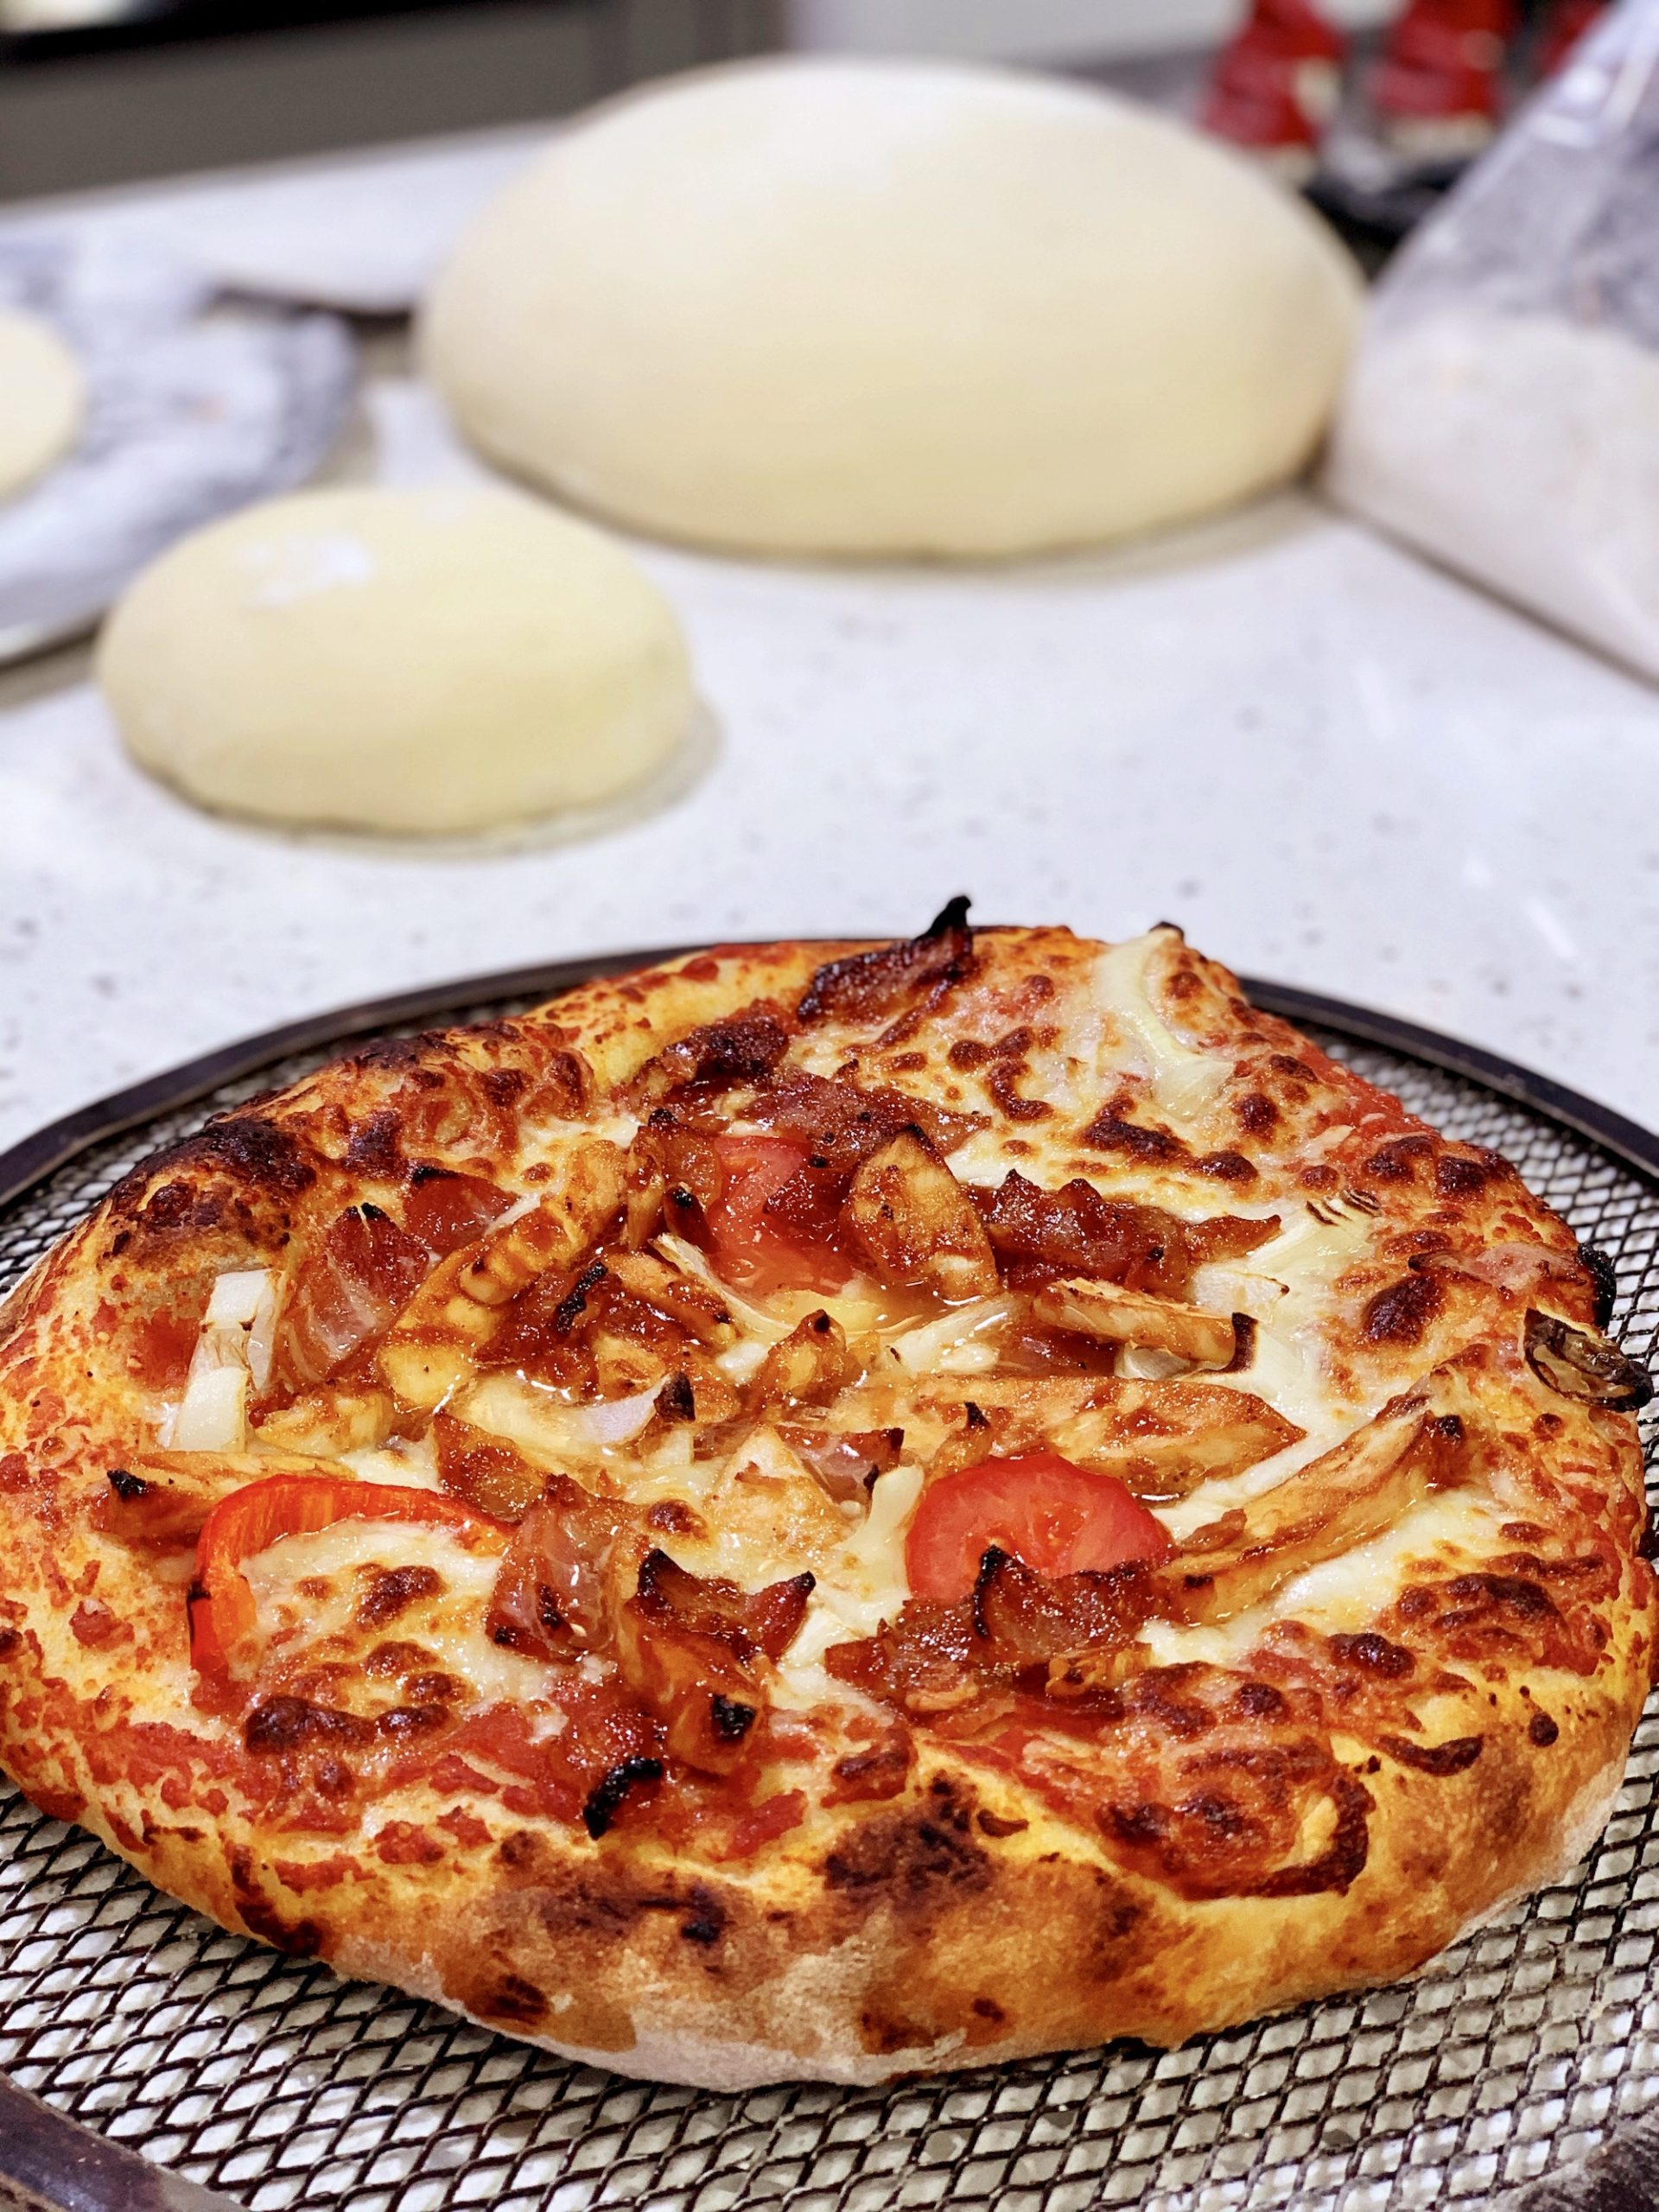 BBQ Chicken and Bacon Pizza - cooking with chef bryan